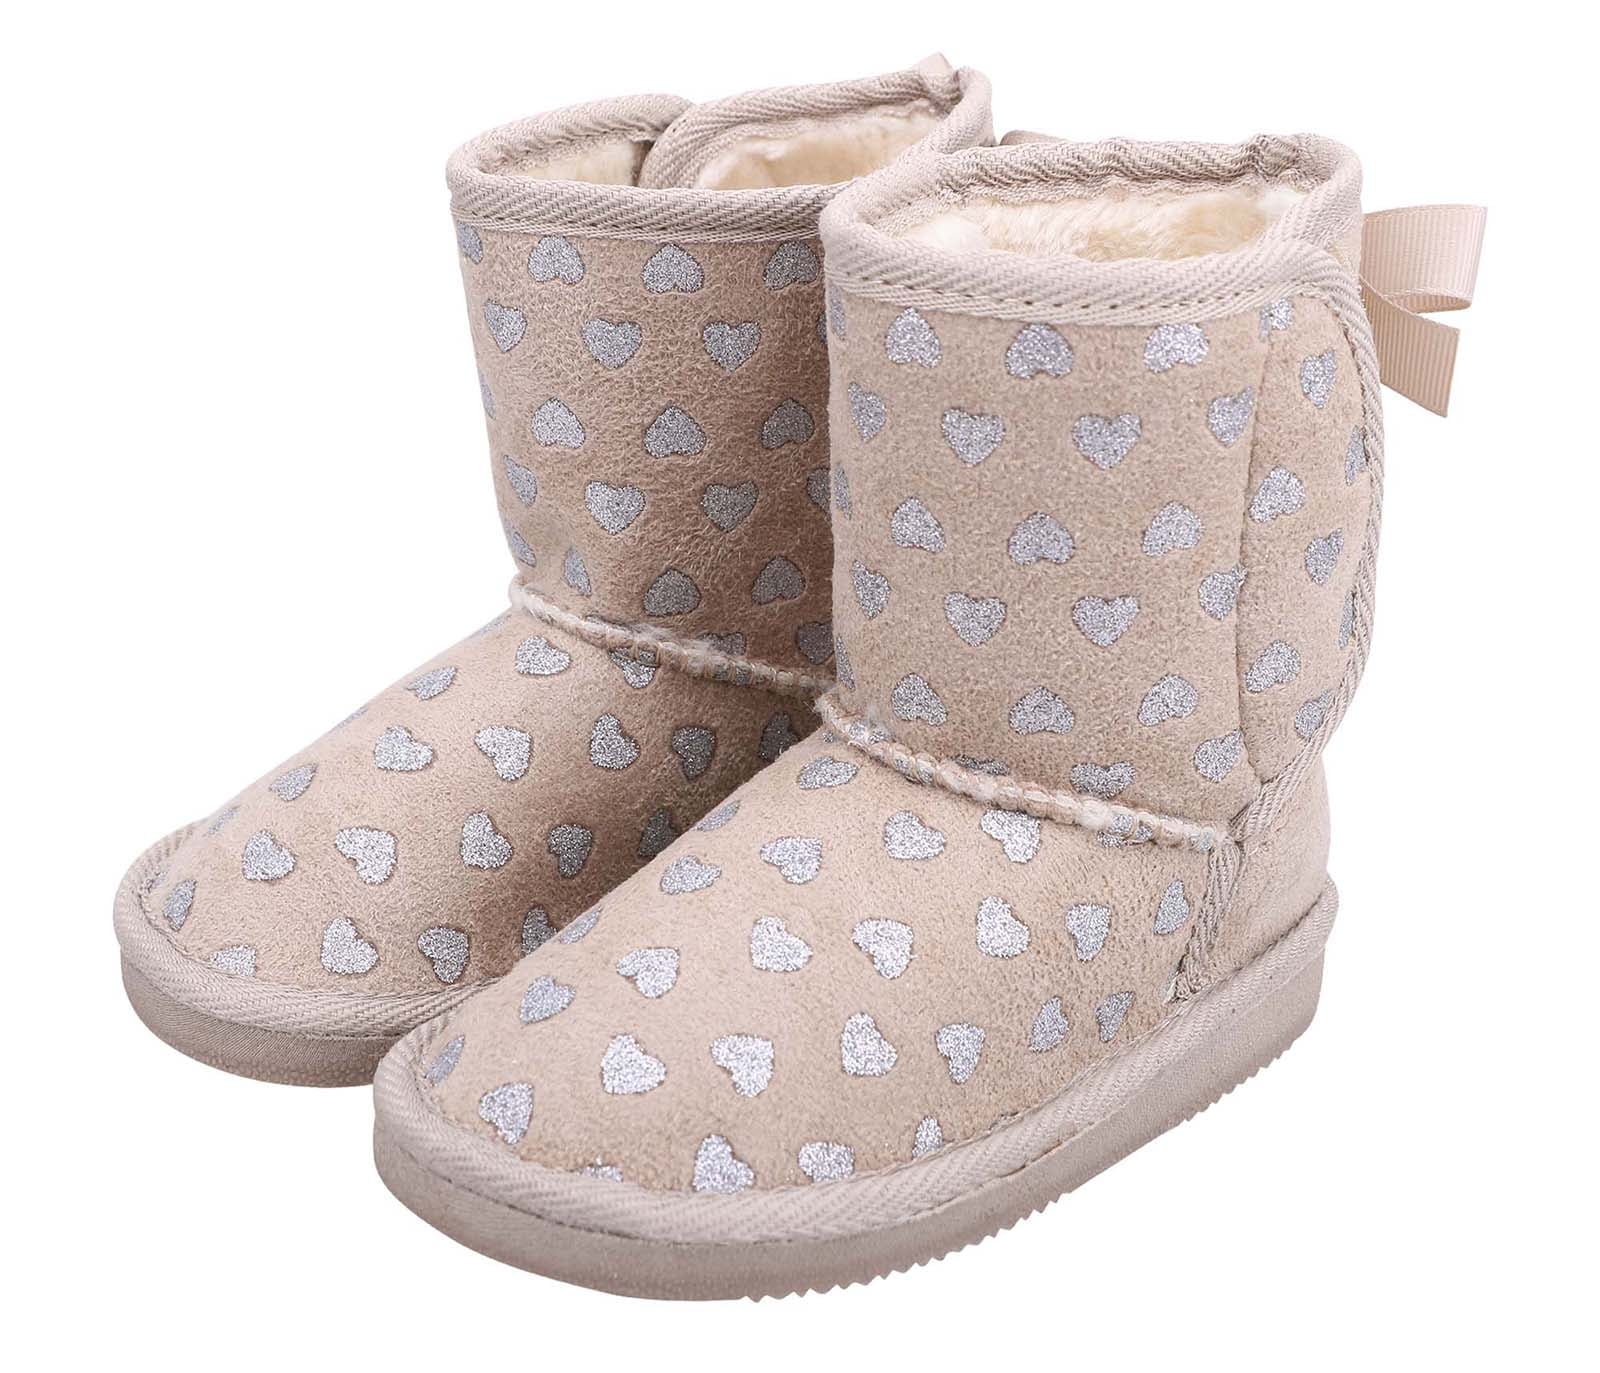 LINKEY Baby Girls Rainbow Stripes Ankle Snow Boots Round Toe Plush Booties Crib Shoes